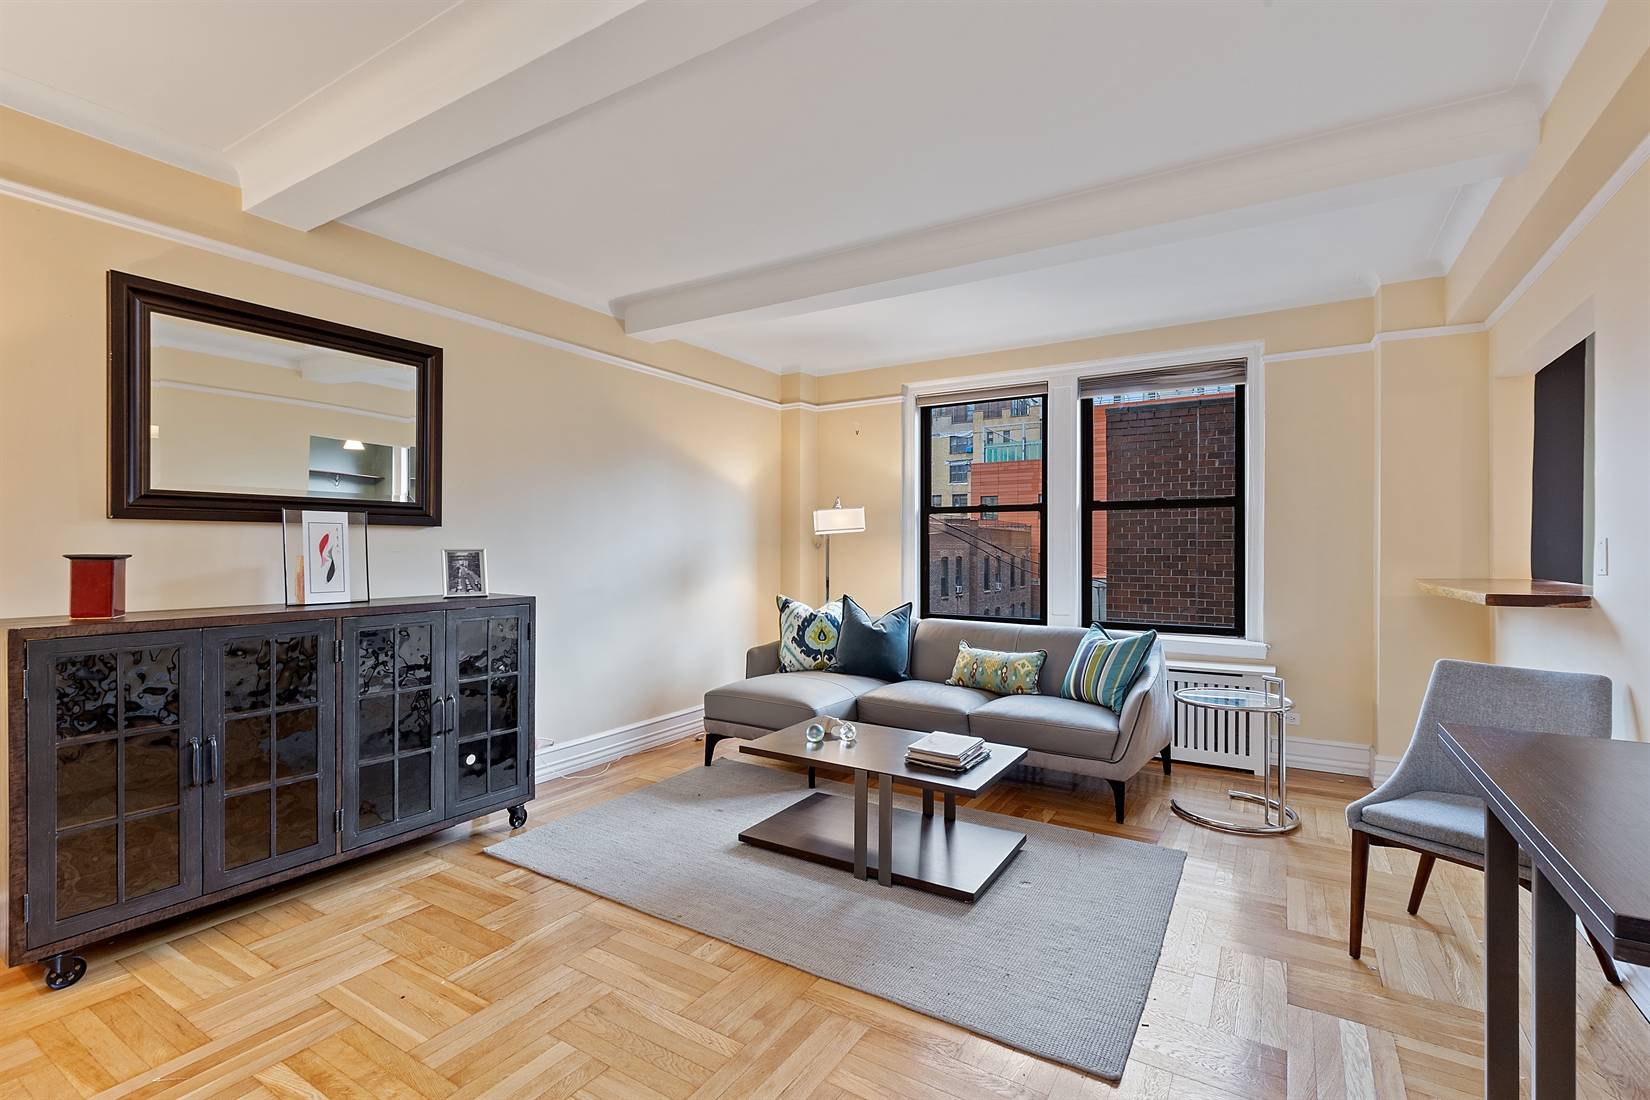 With only 3 apartments to the floor, this spacious and bright prewar one bedroom condominium home has the elegance of a prewar home coupled with modern conveniences.